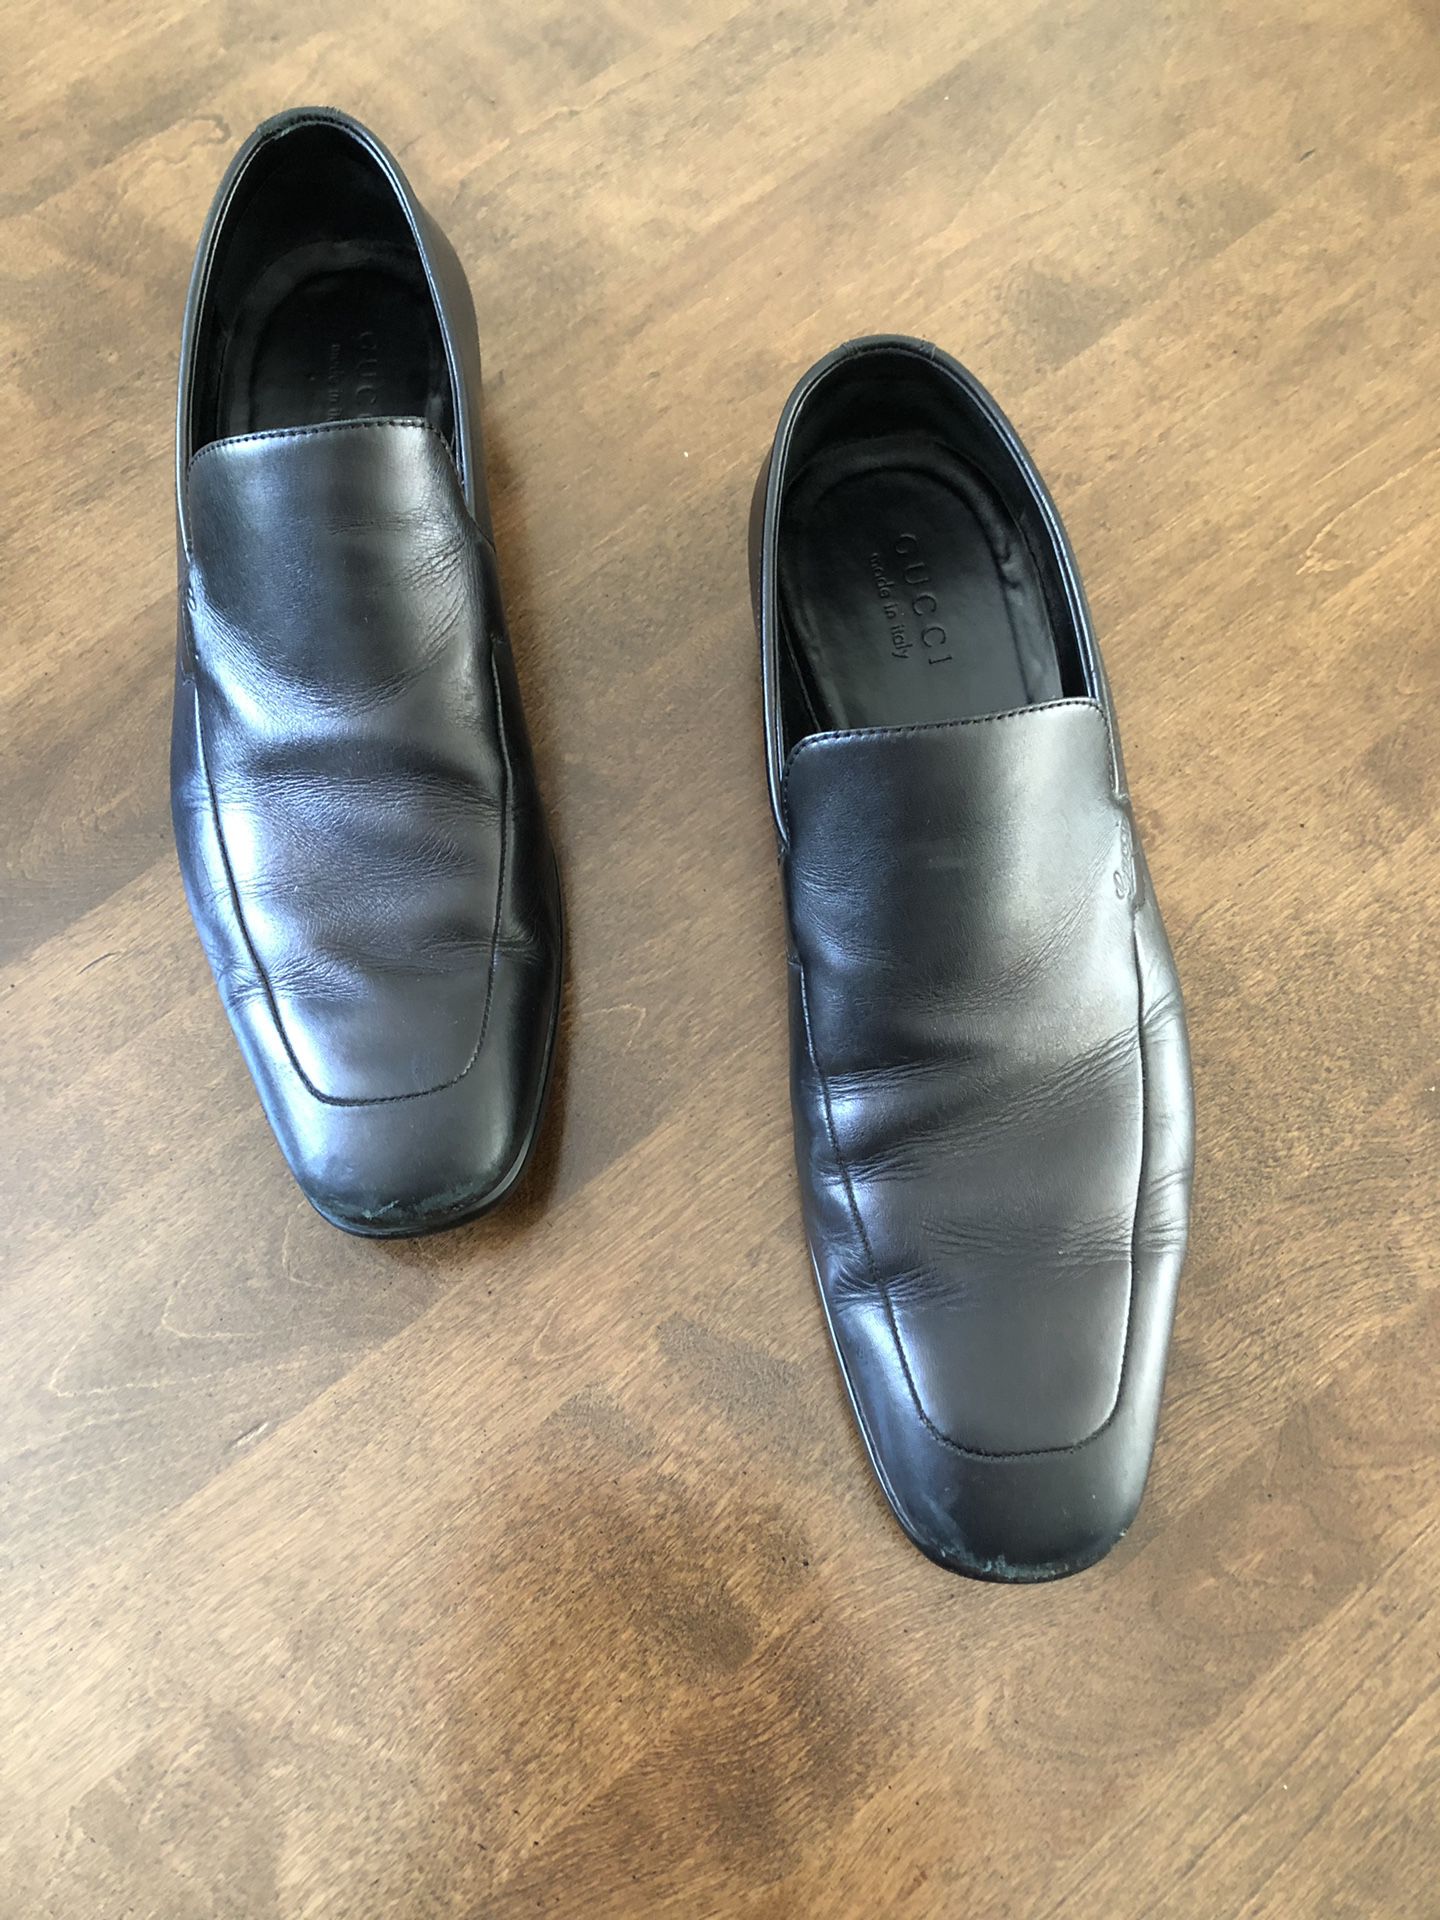 Men’s Black Gucci Loafers - size 9.5